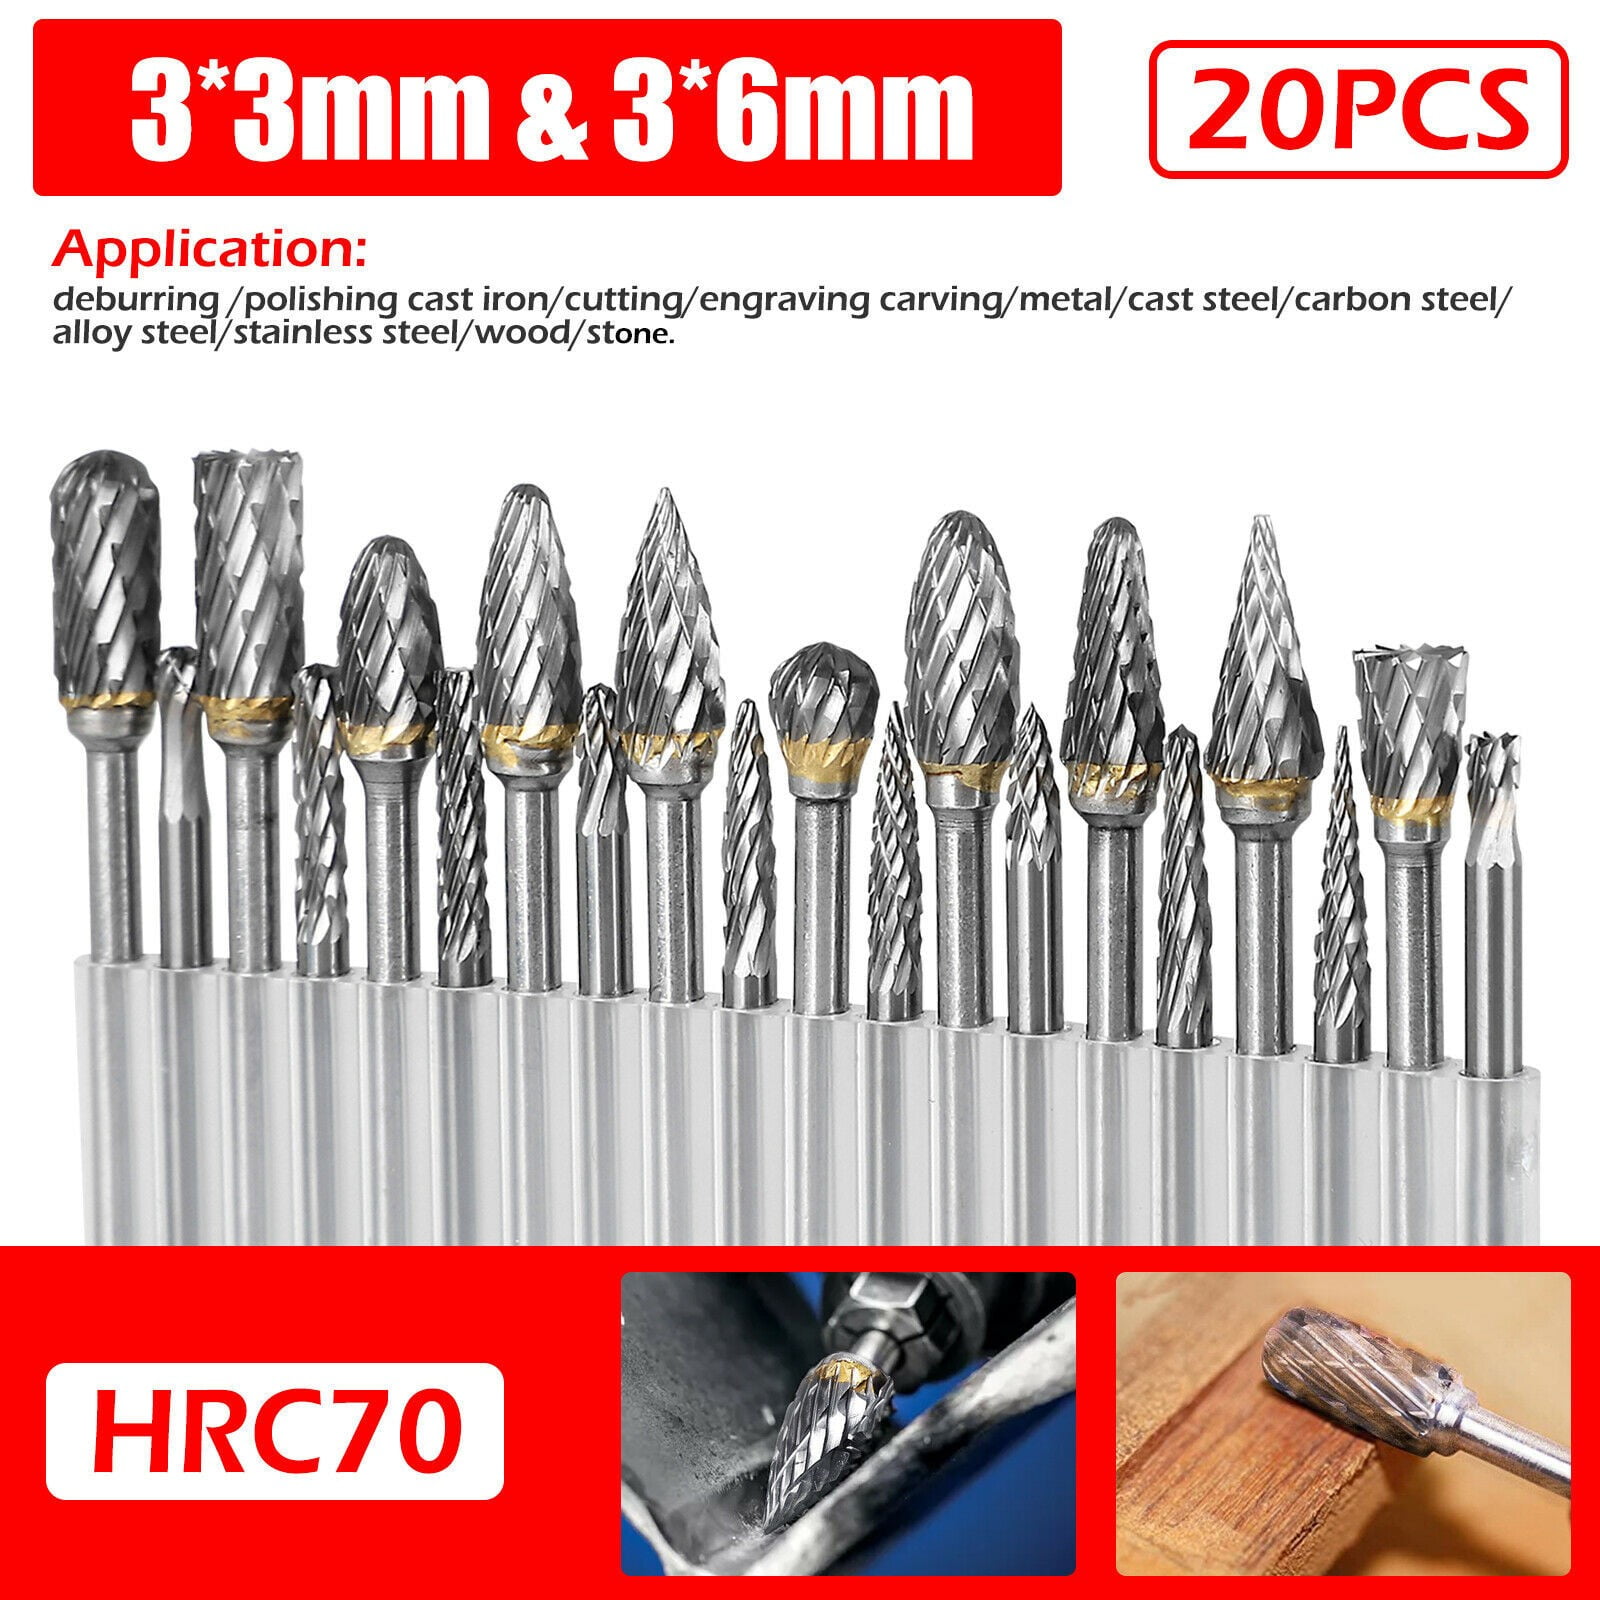 20PCS Tungsten Carbide Rotary Drill Bits Tool Burr Die Grinder Shank Carving Set 